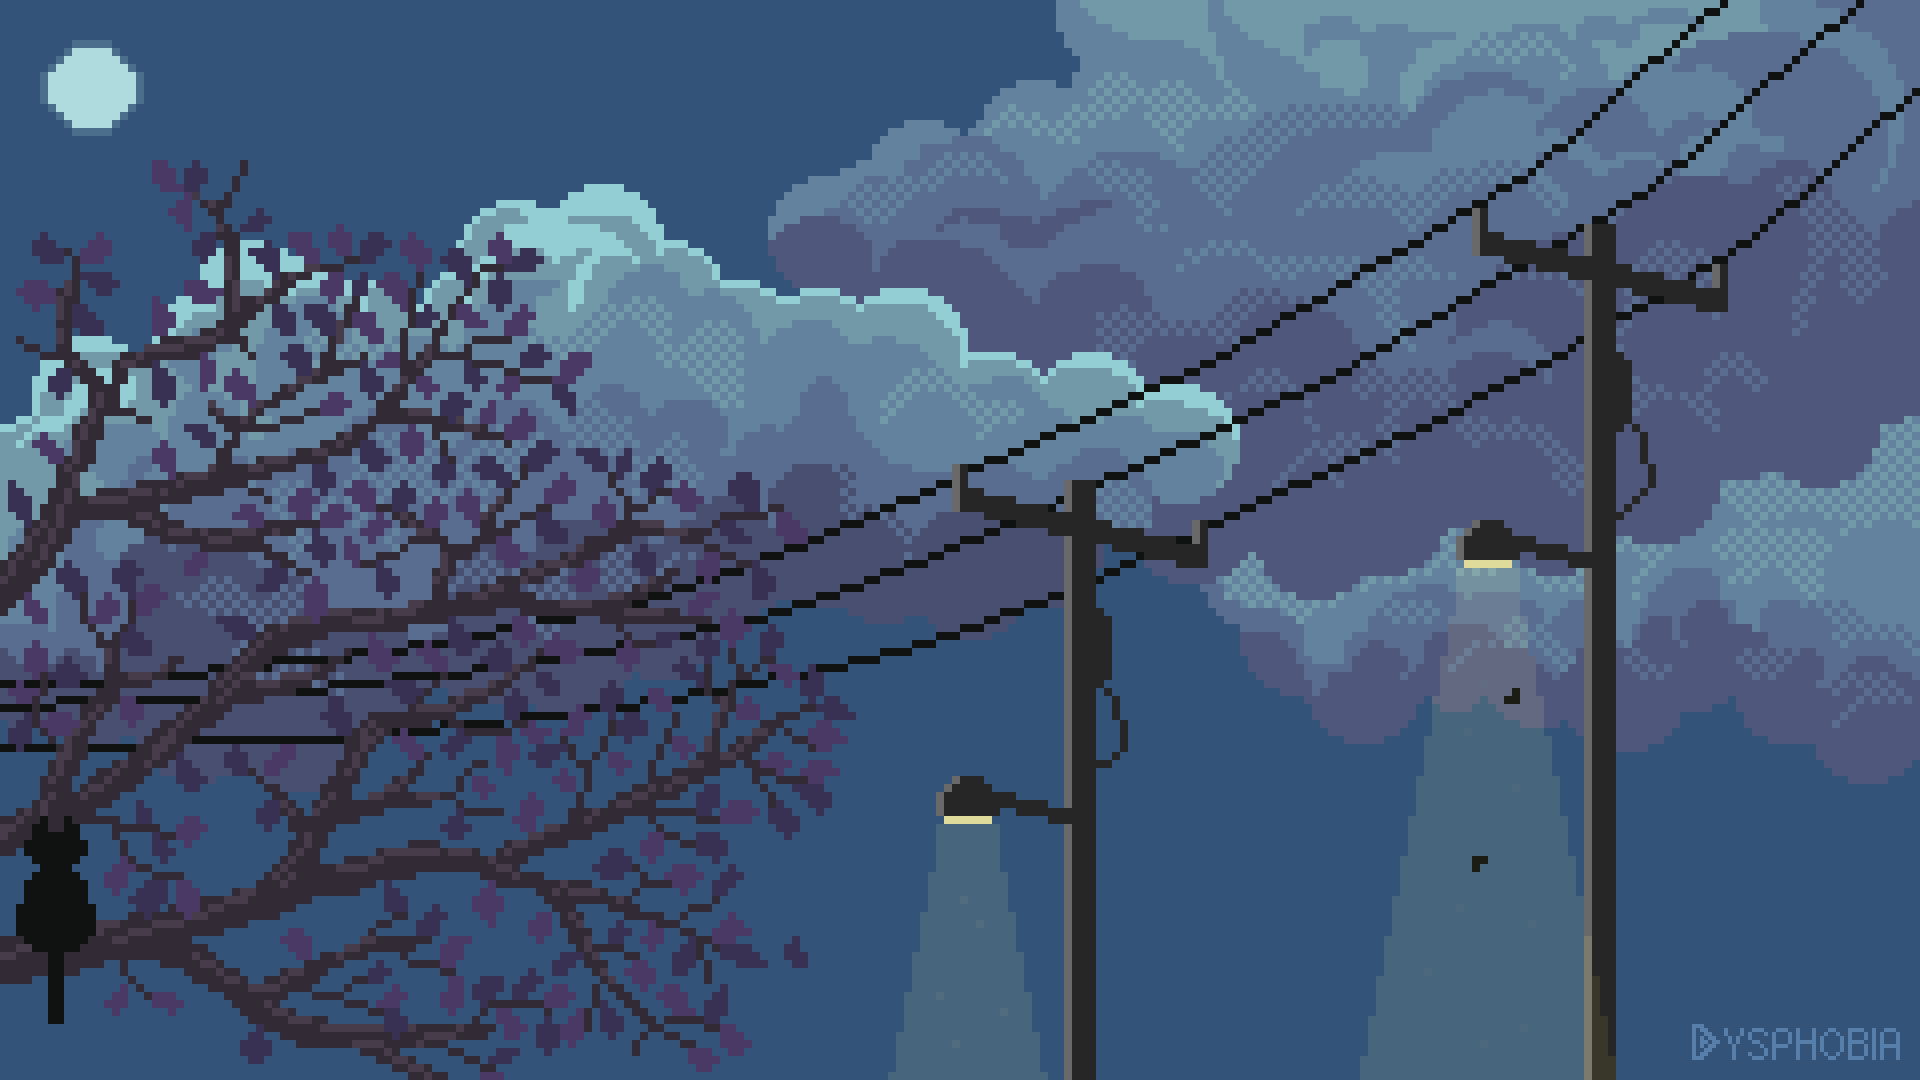 A pixel art image of a street lamp at night with a purple sky and pink tree. - Pixel art